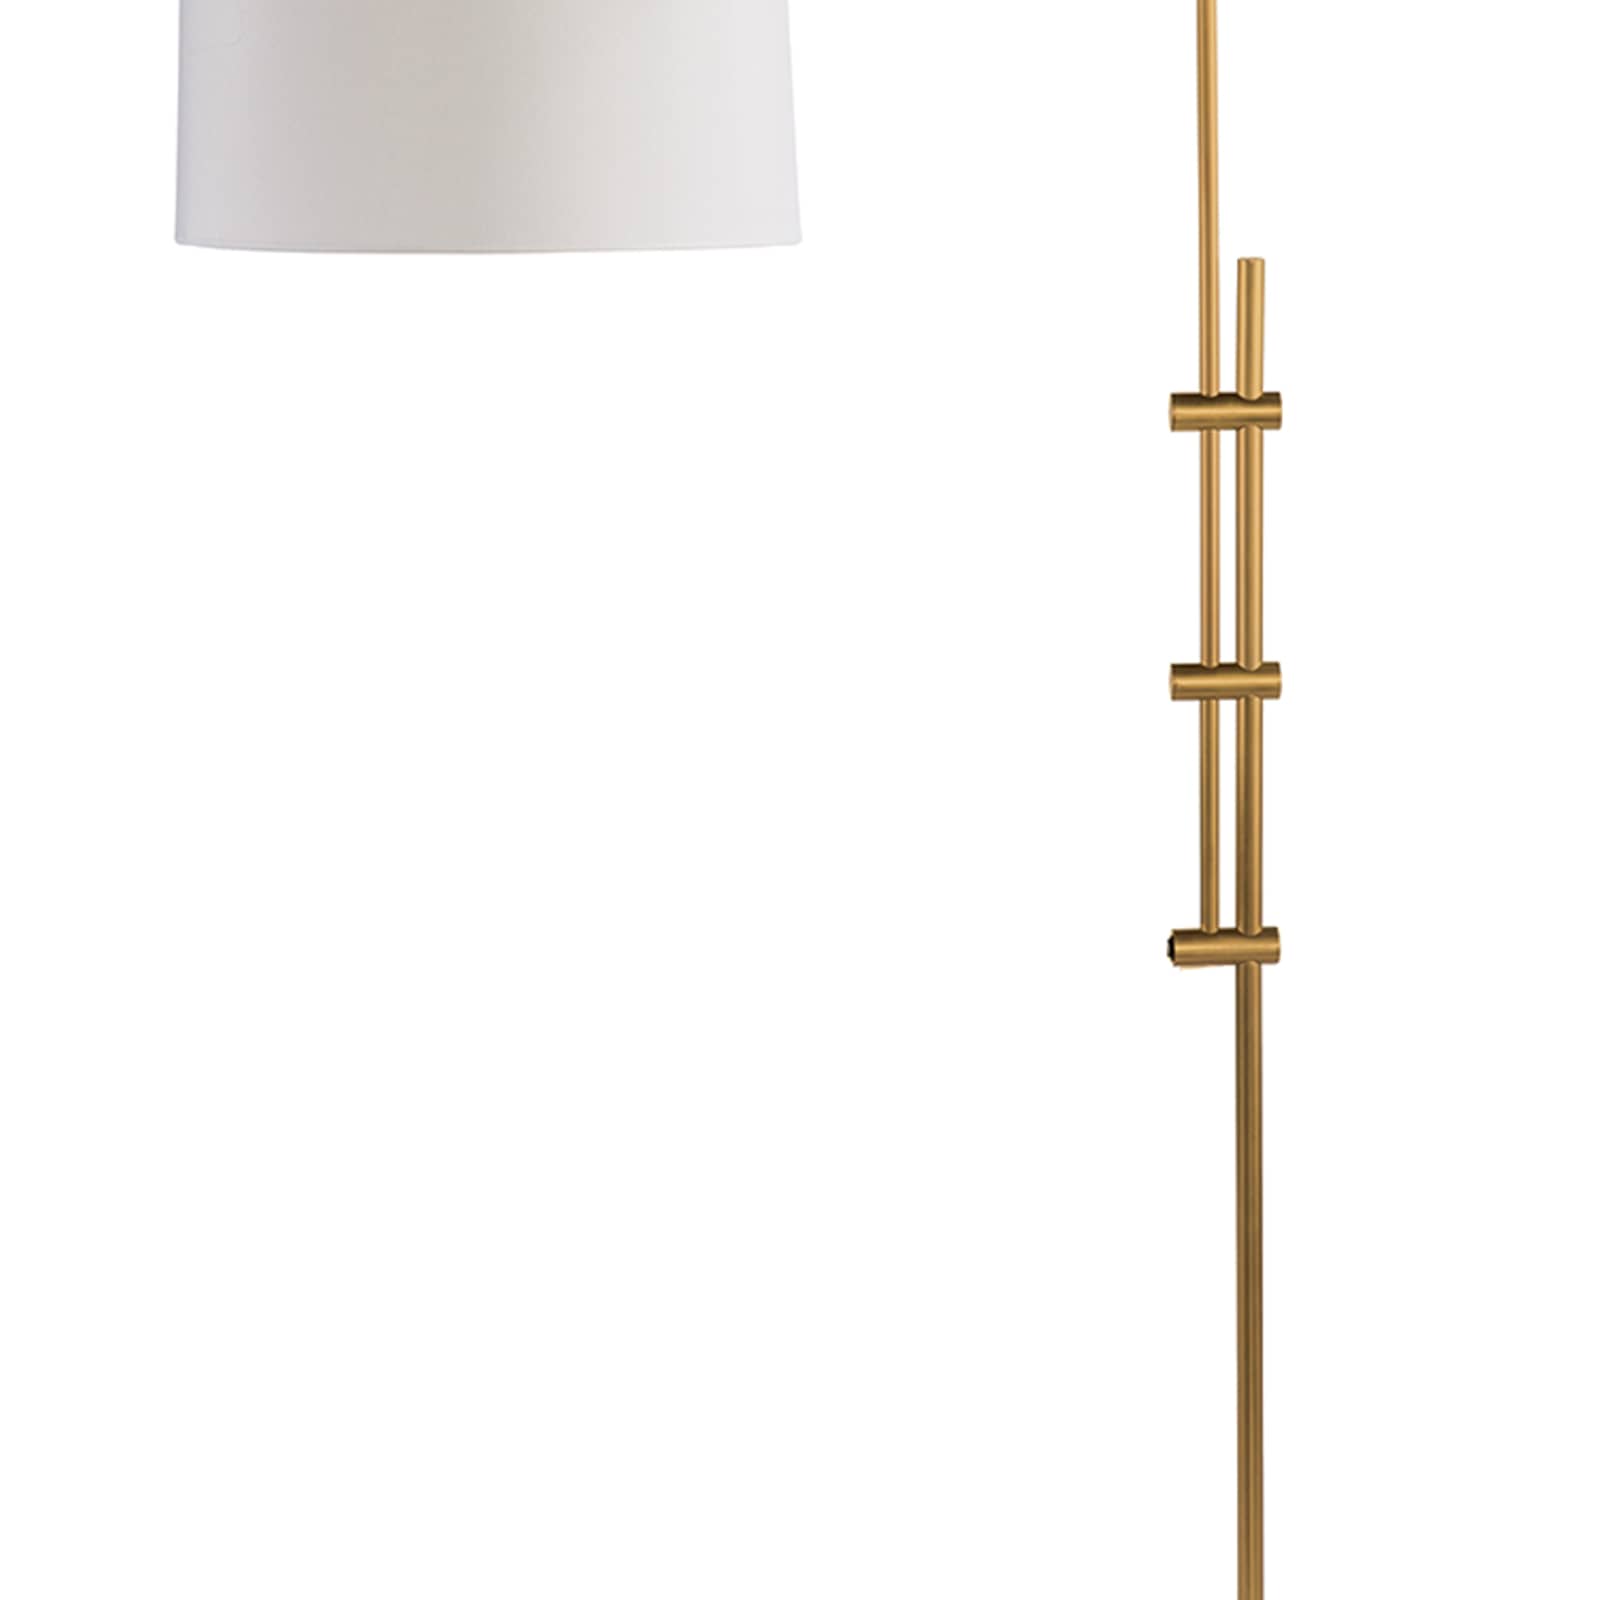 Arc Floor Lamp With Fabric Shade in Natural Brass by Regina Andrew